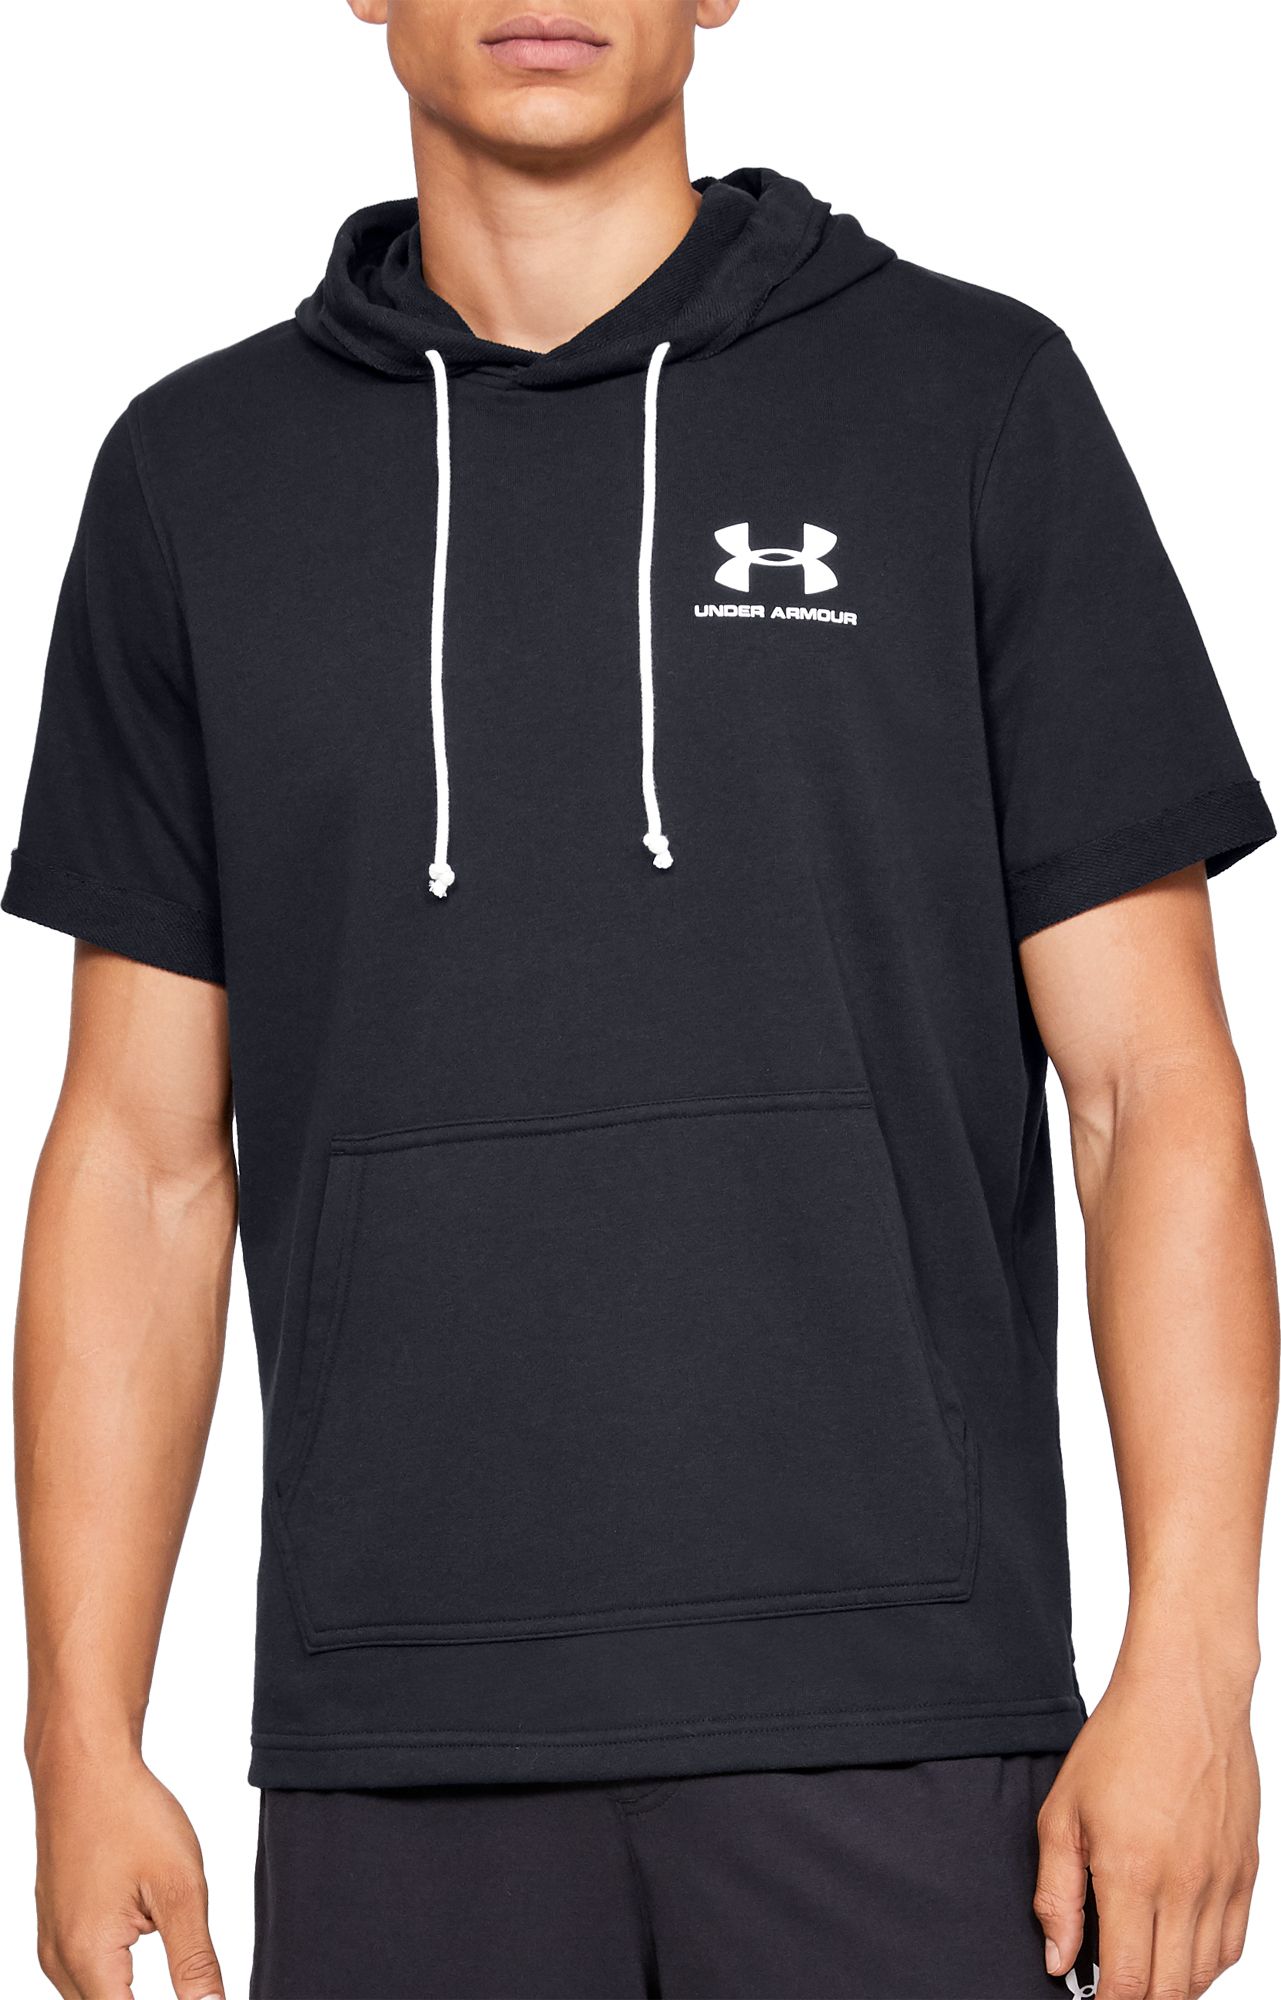 mens white under armour hoodie